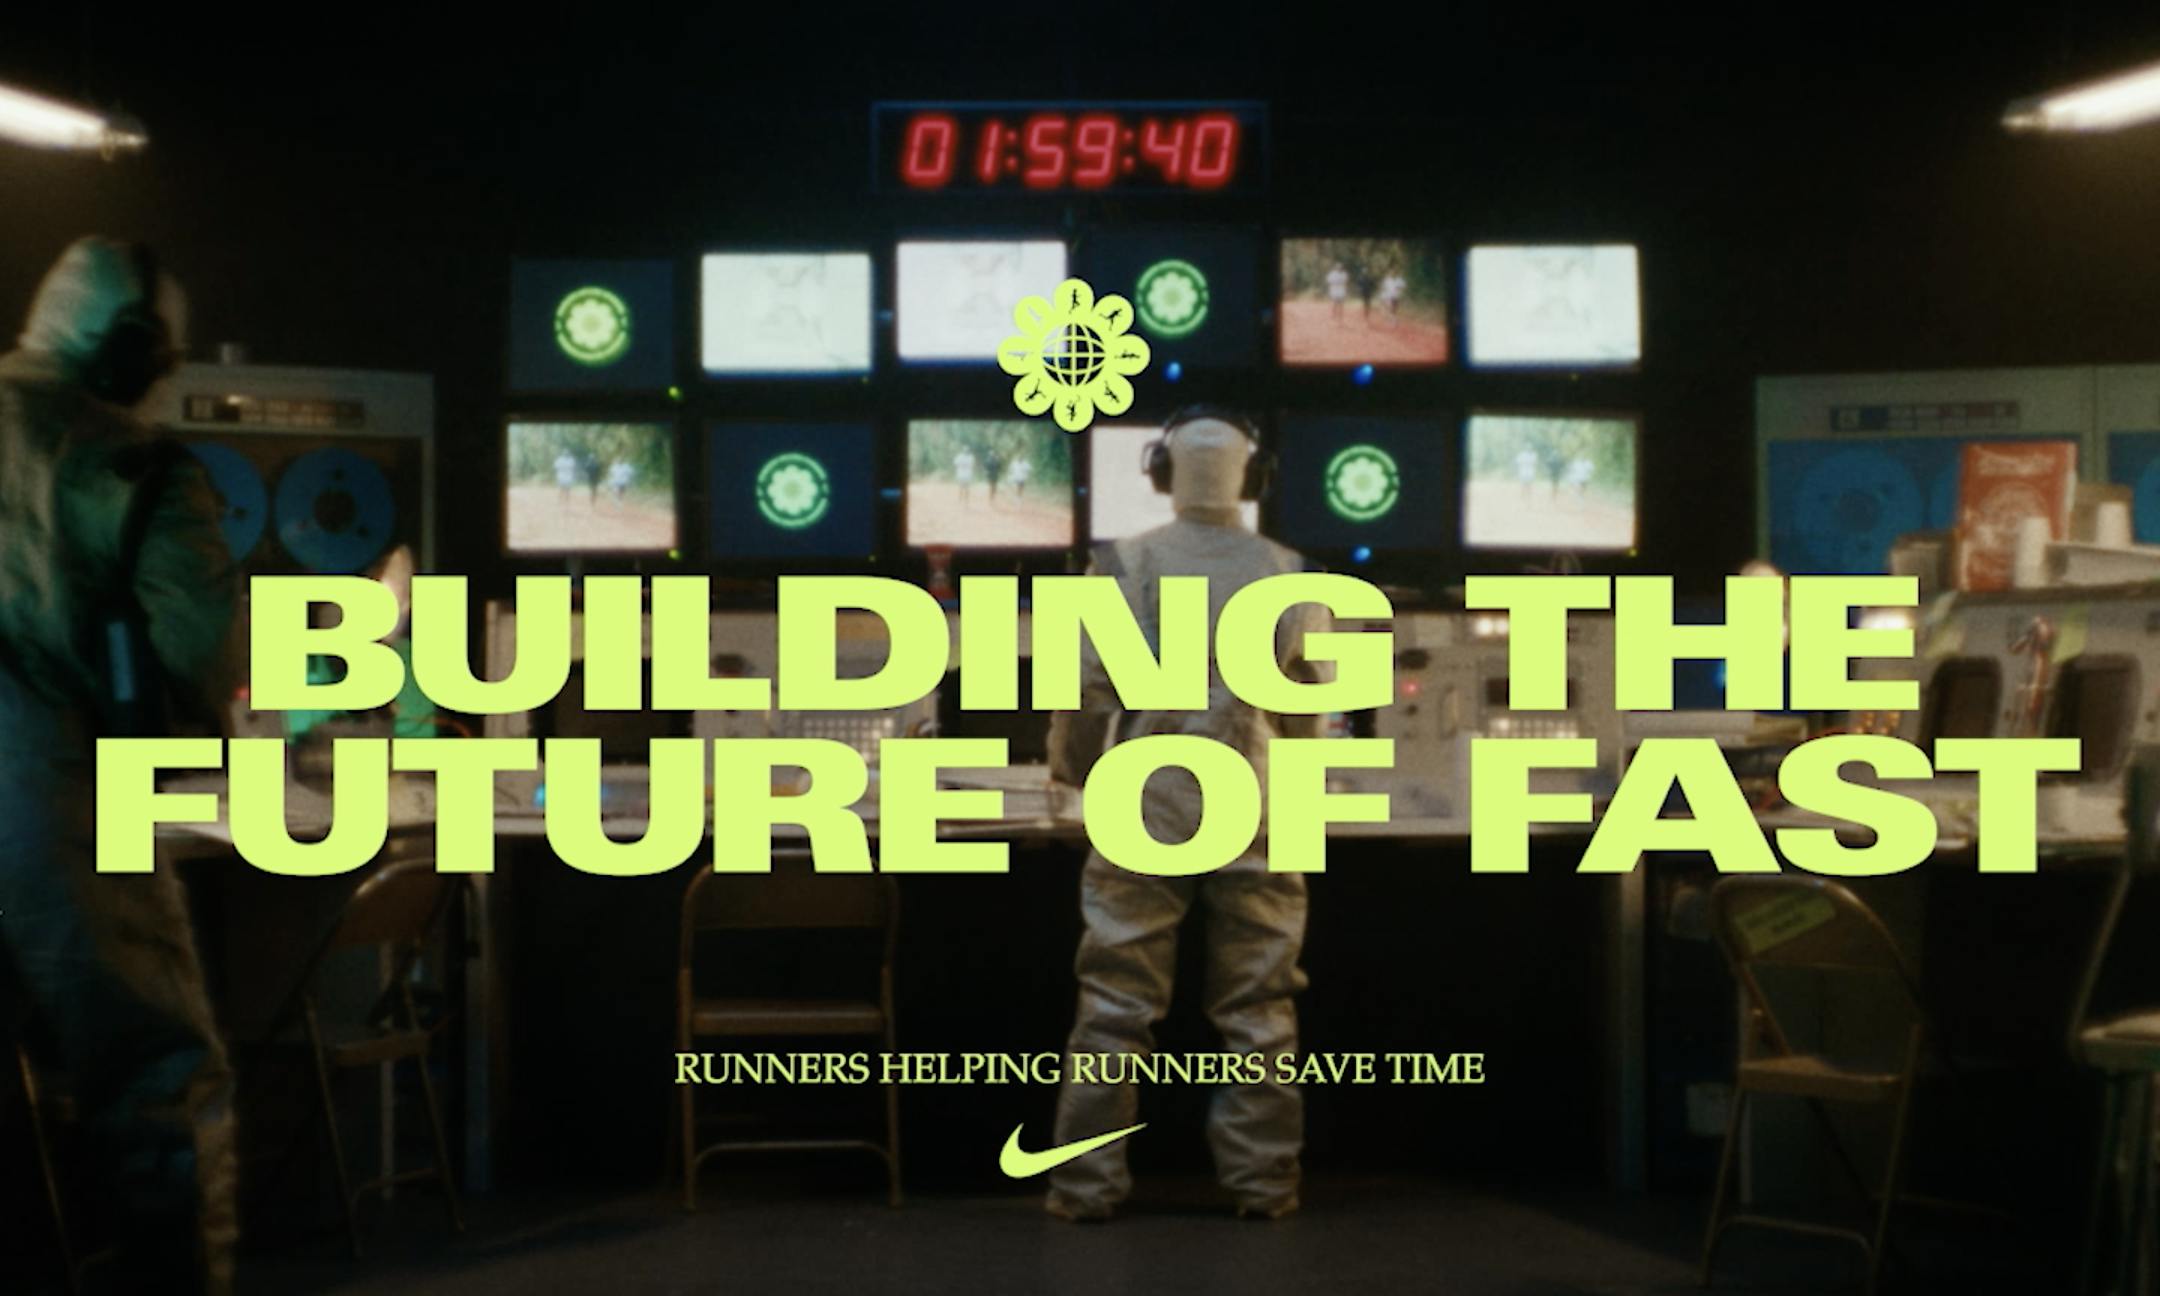 Nike ad saying Building the future of fast